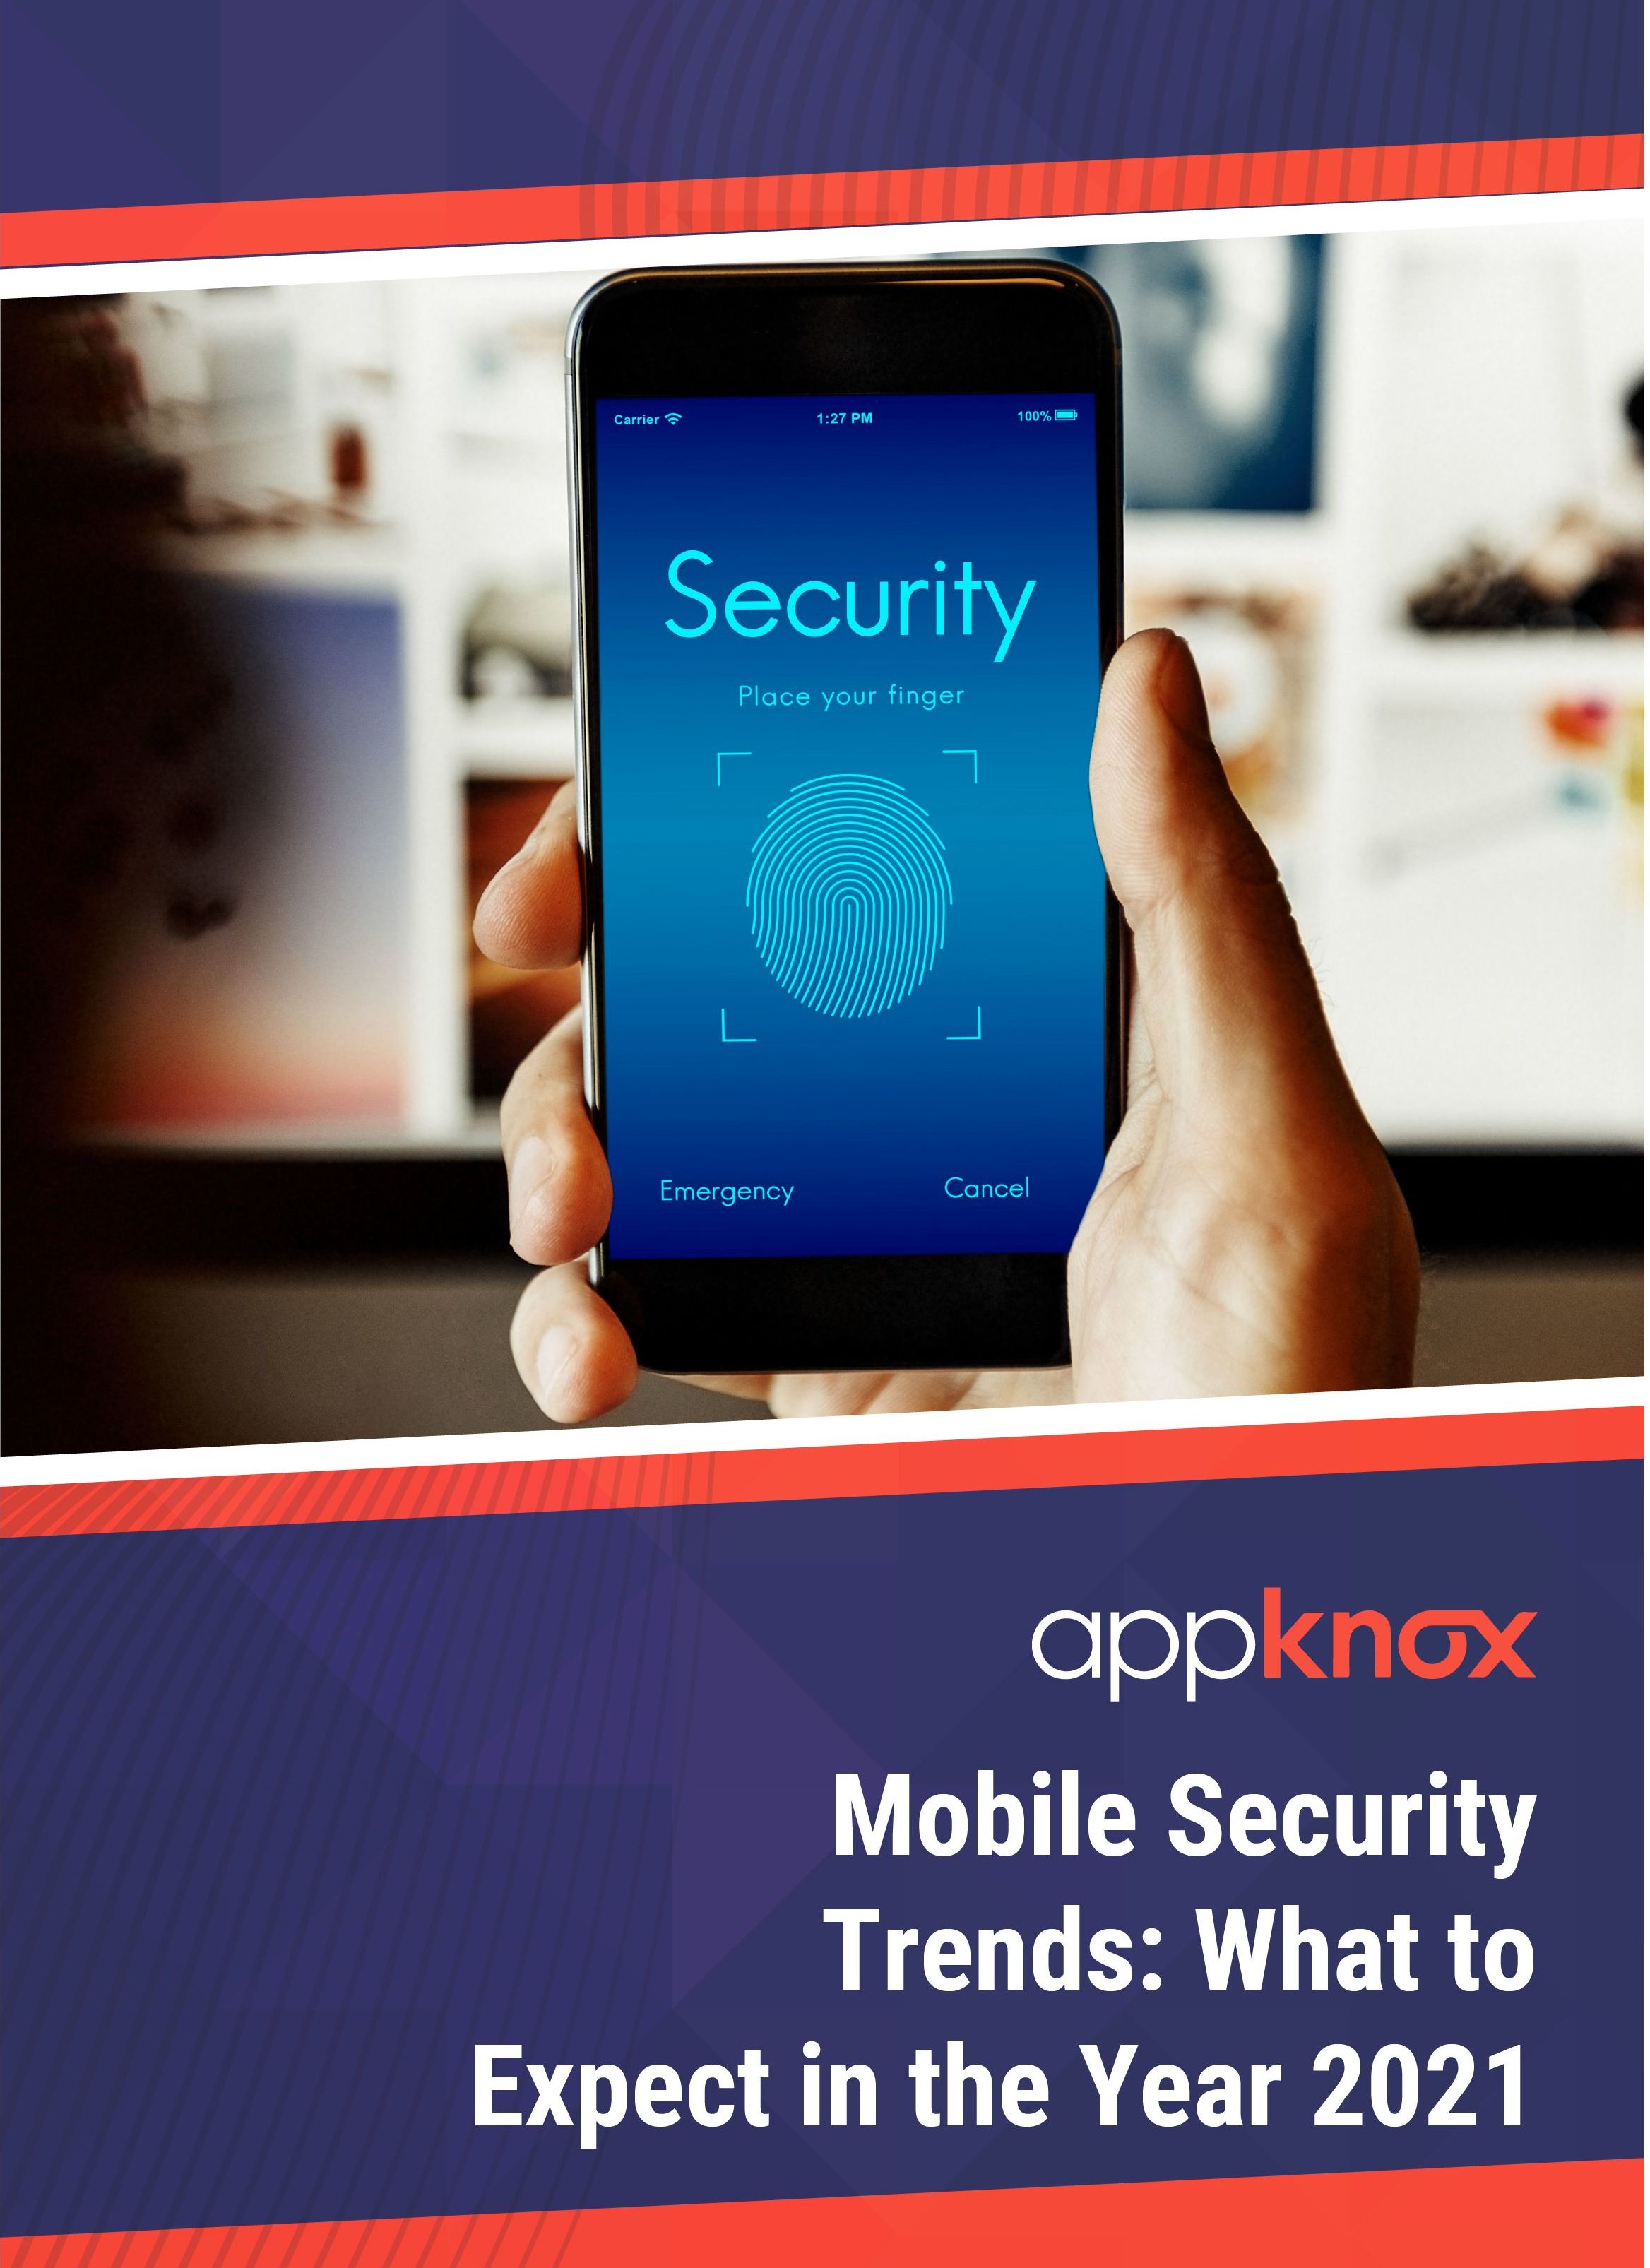 Mobile Security trends in 2021